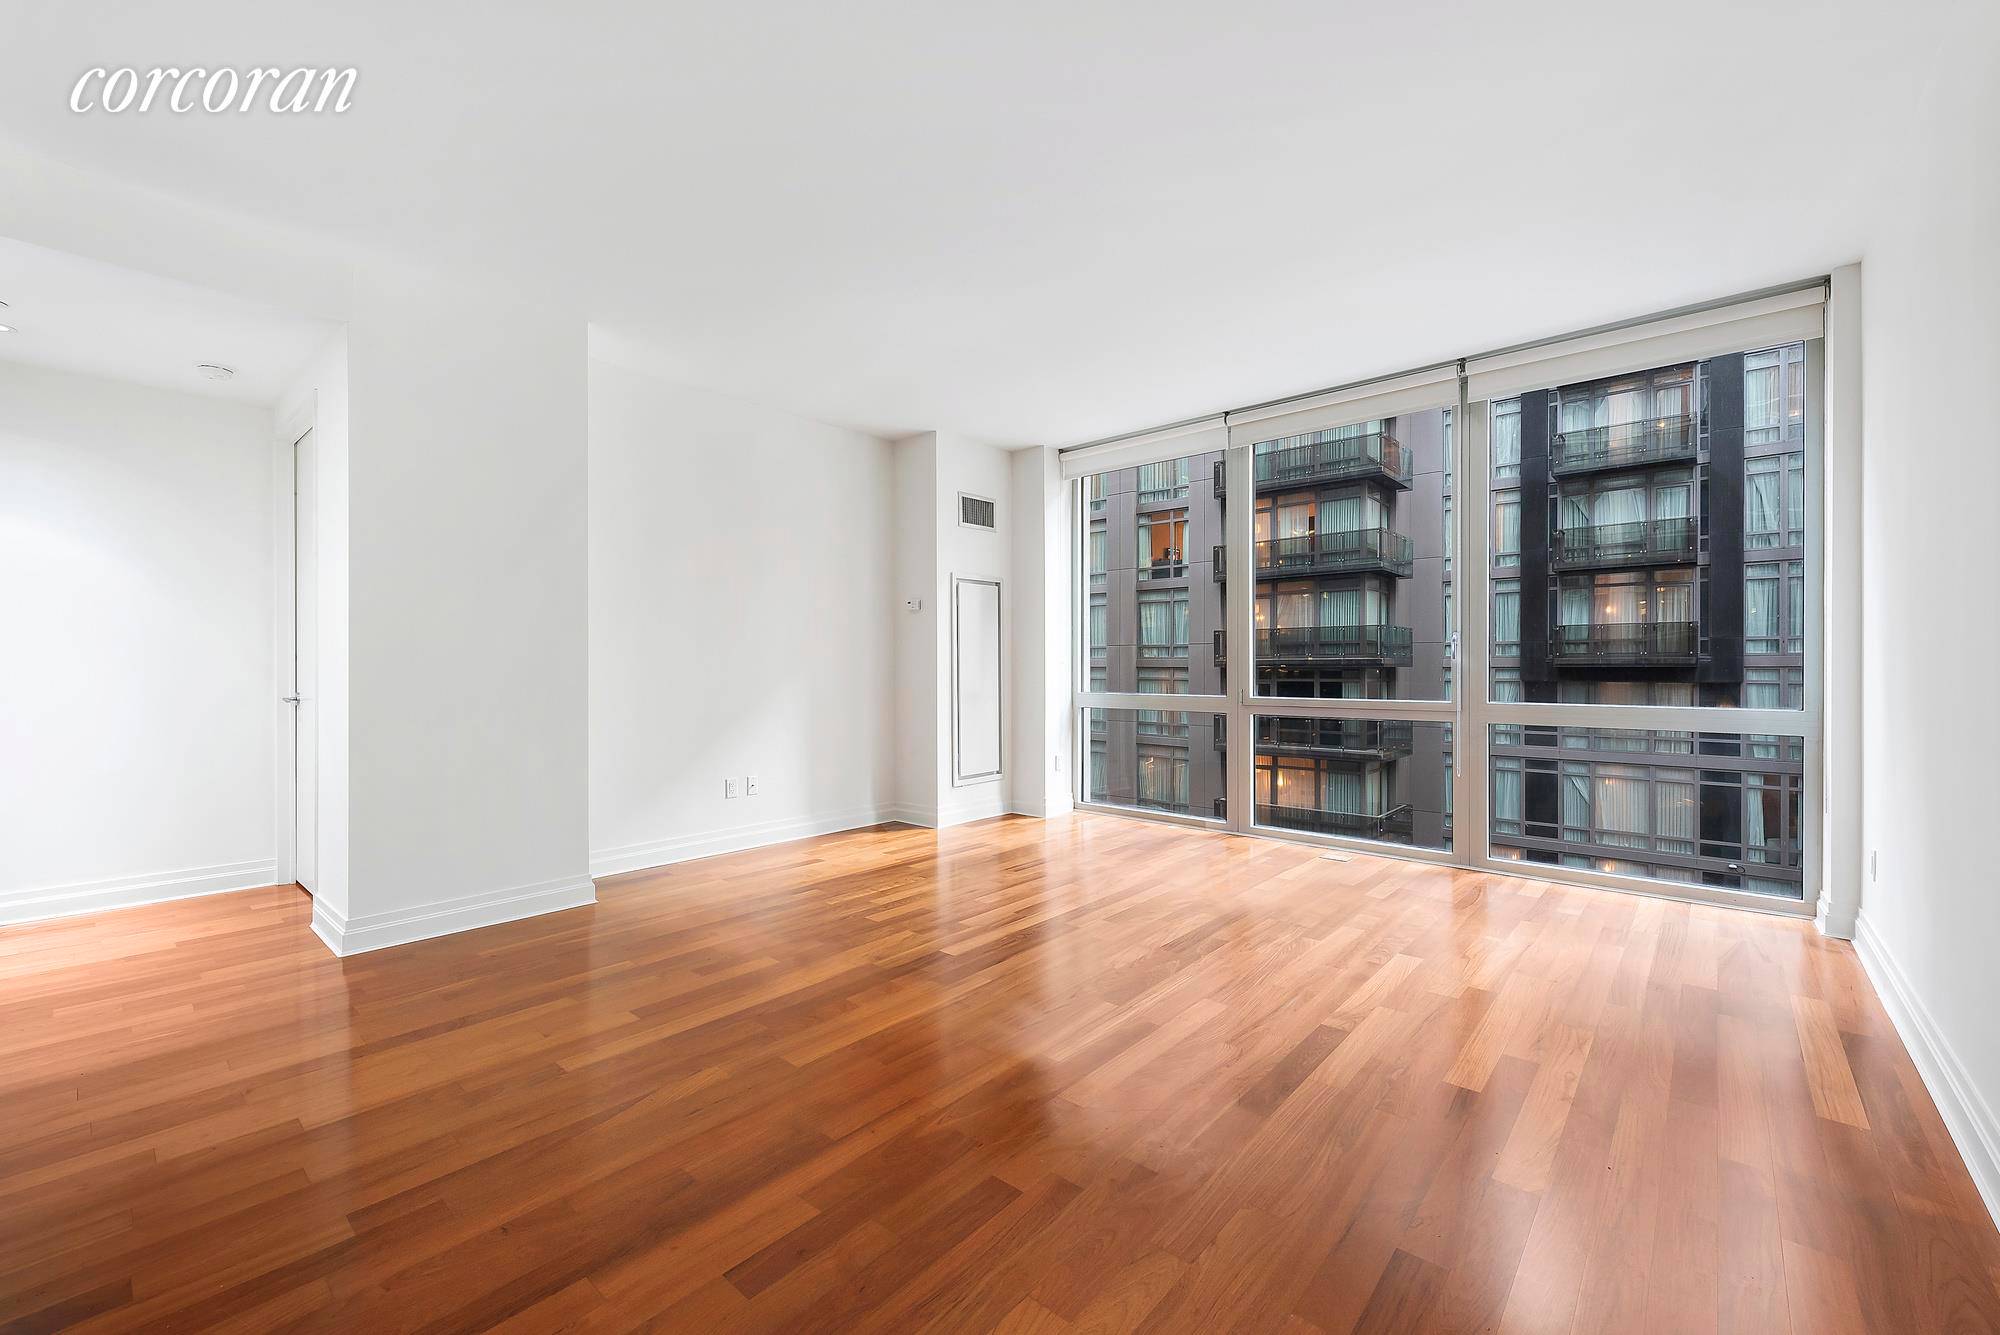 39 East 29th Street is an award winning full service condominium conveniently located in the Flatiron NoMad section of Manhattan.